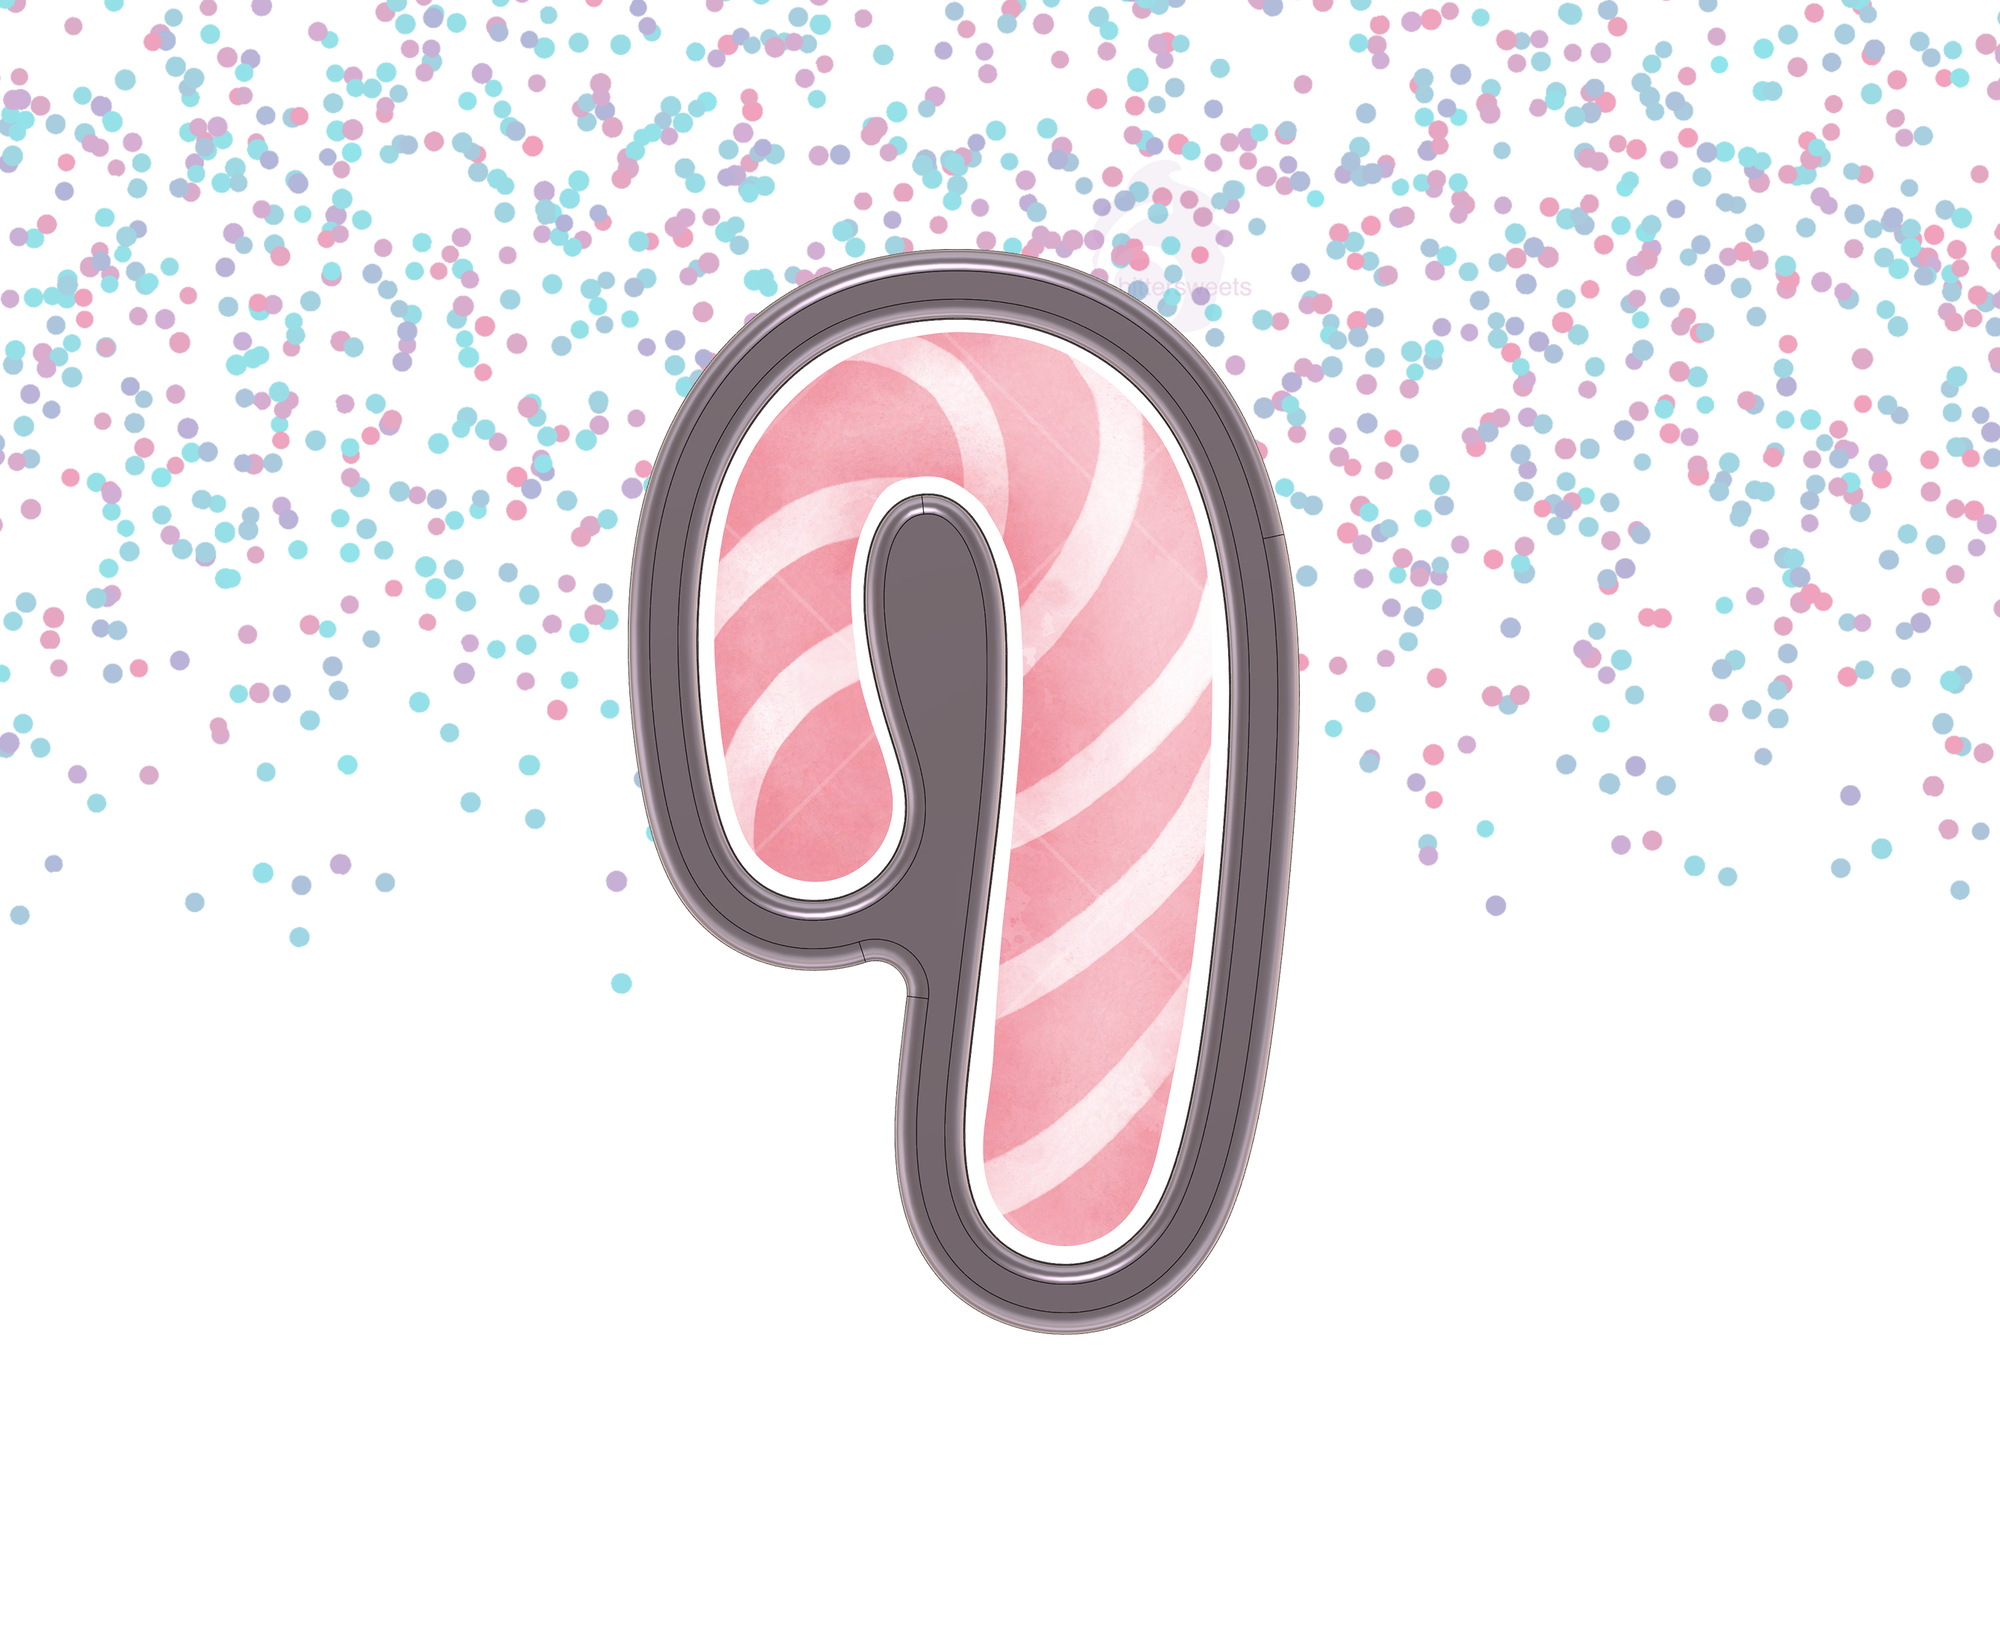 Candy Cane 1 Cookie Cutter